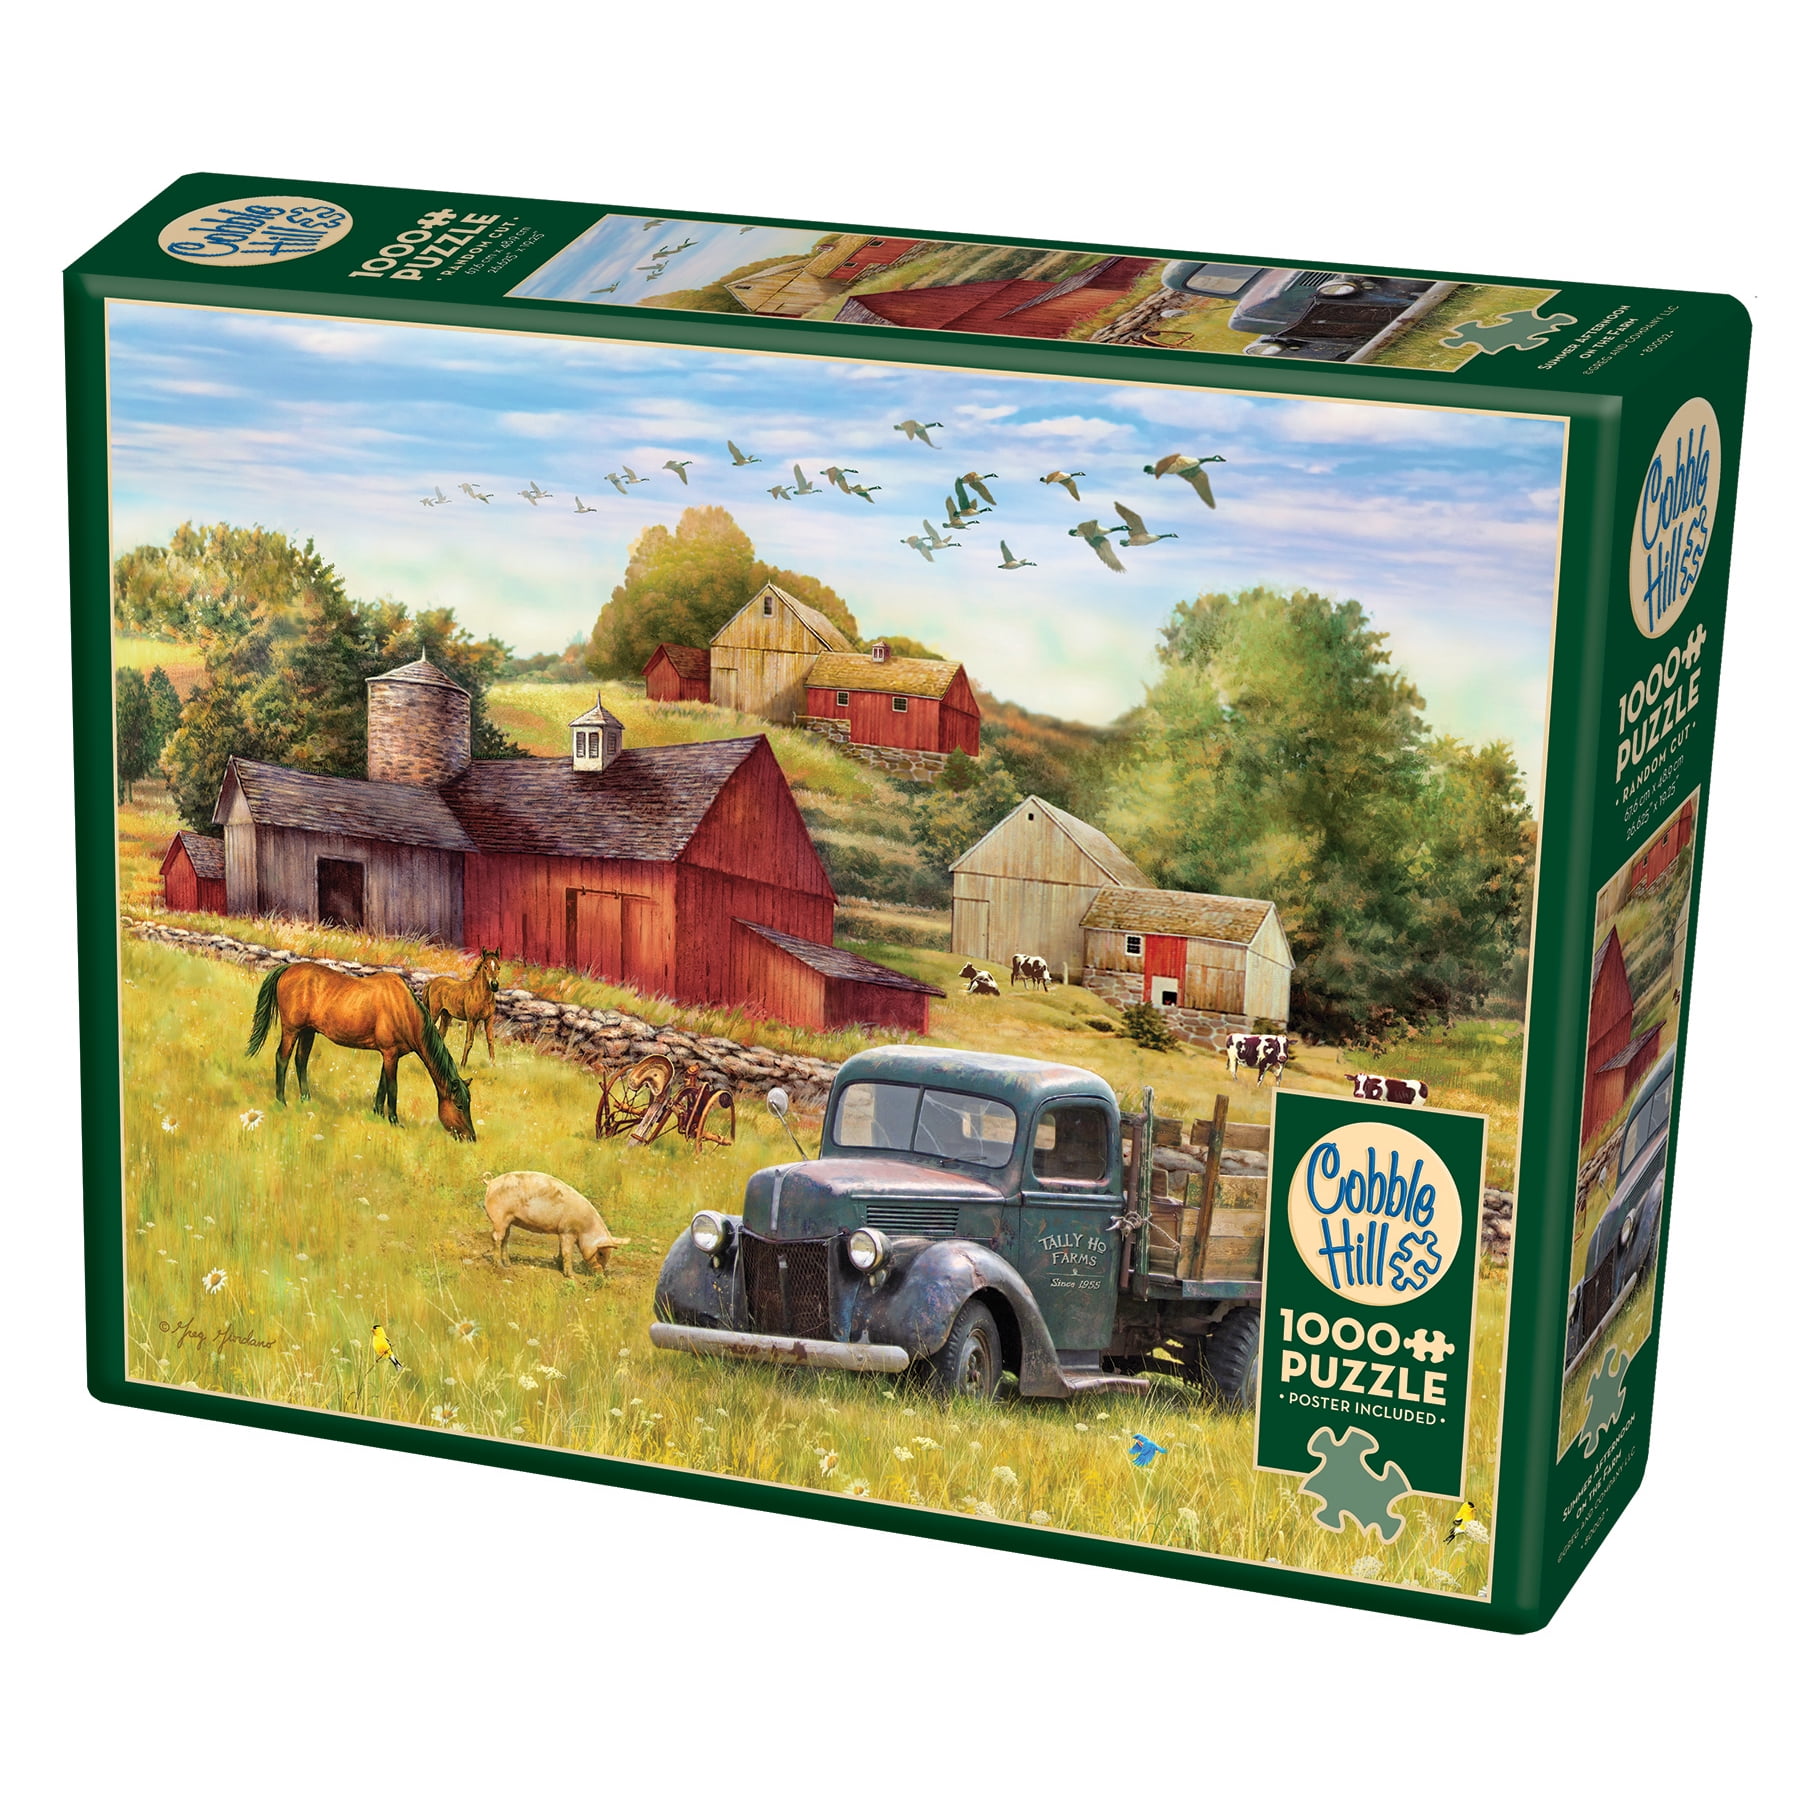 Summer Afternoon on the Farm 500 Piece Jigsaw Puzzle Cobble Hill 